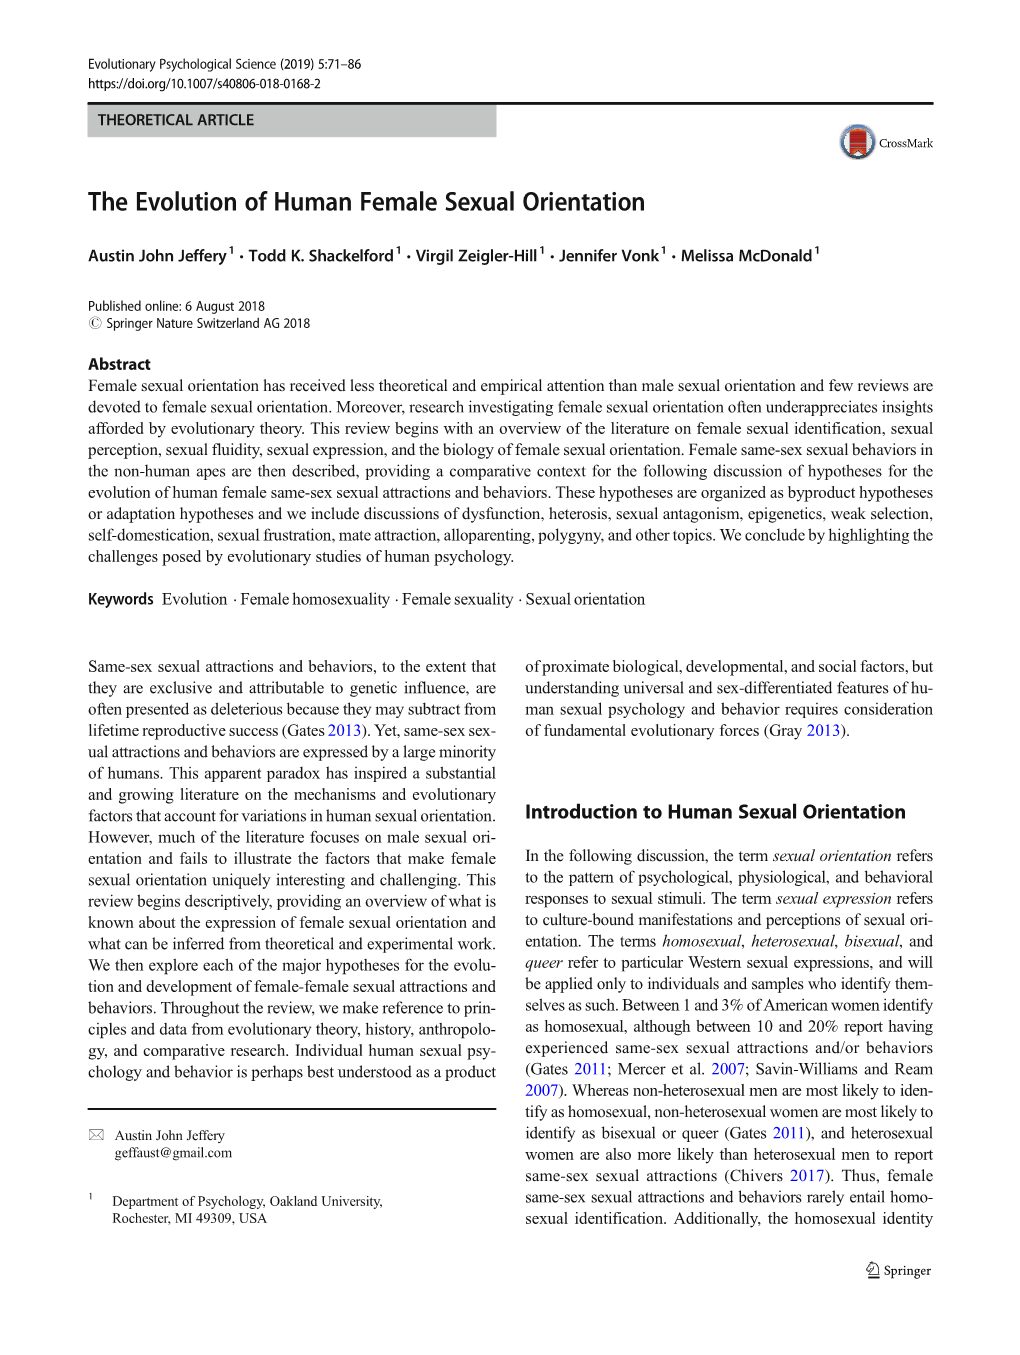 The Evolution of Human Female Sexual Orientation